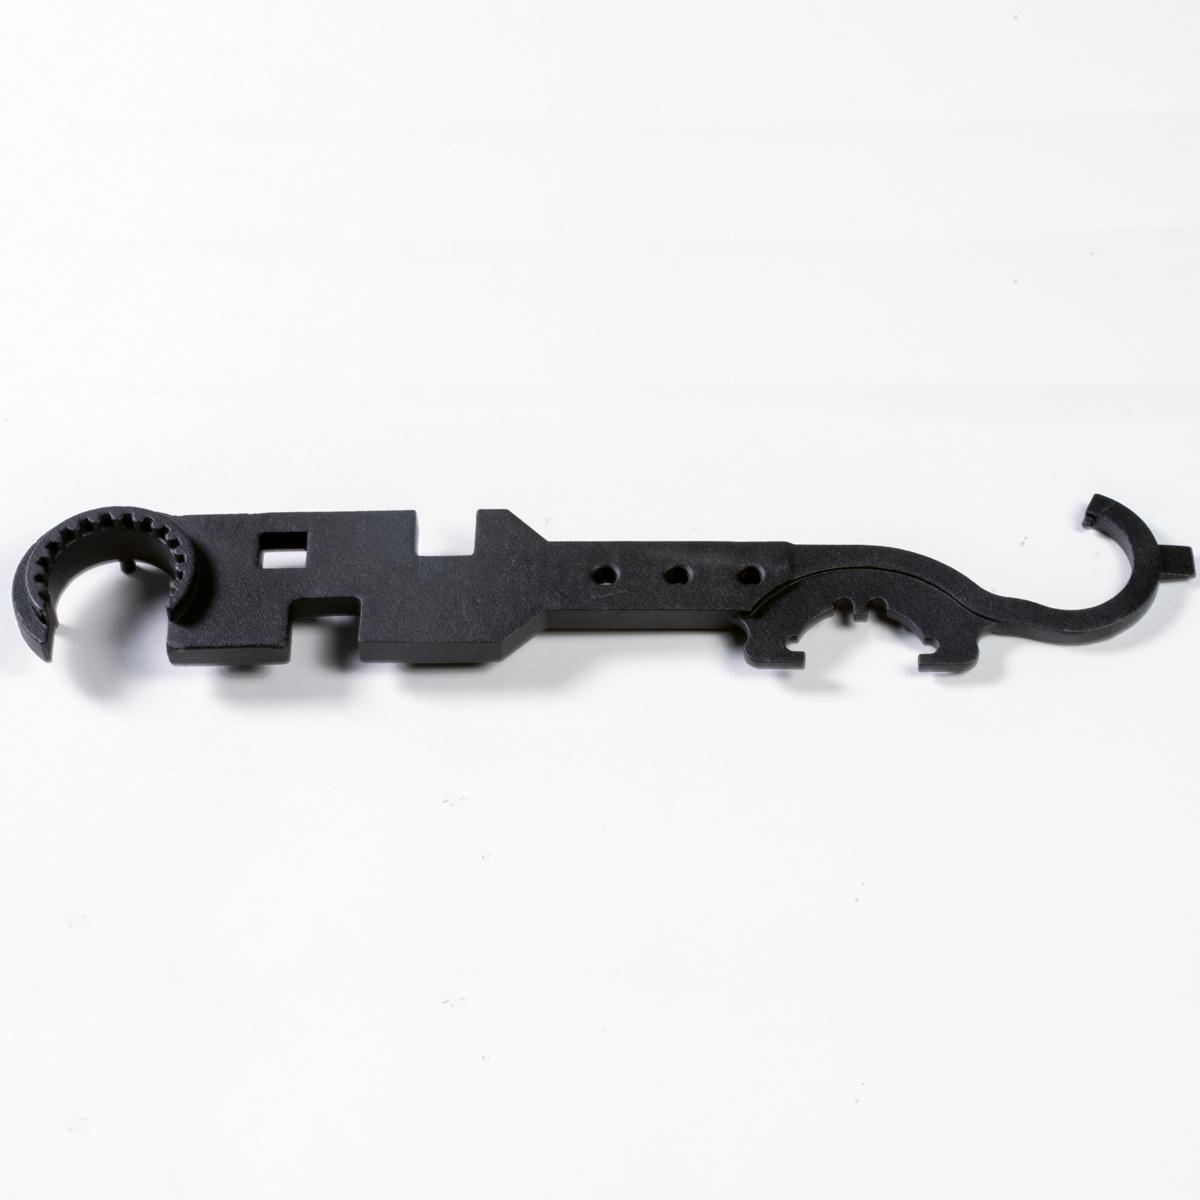 NcStar AR-15 Combo Armorer Wrench Tool - $14.99